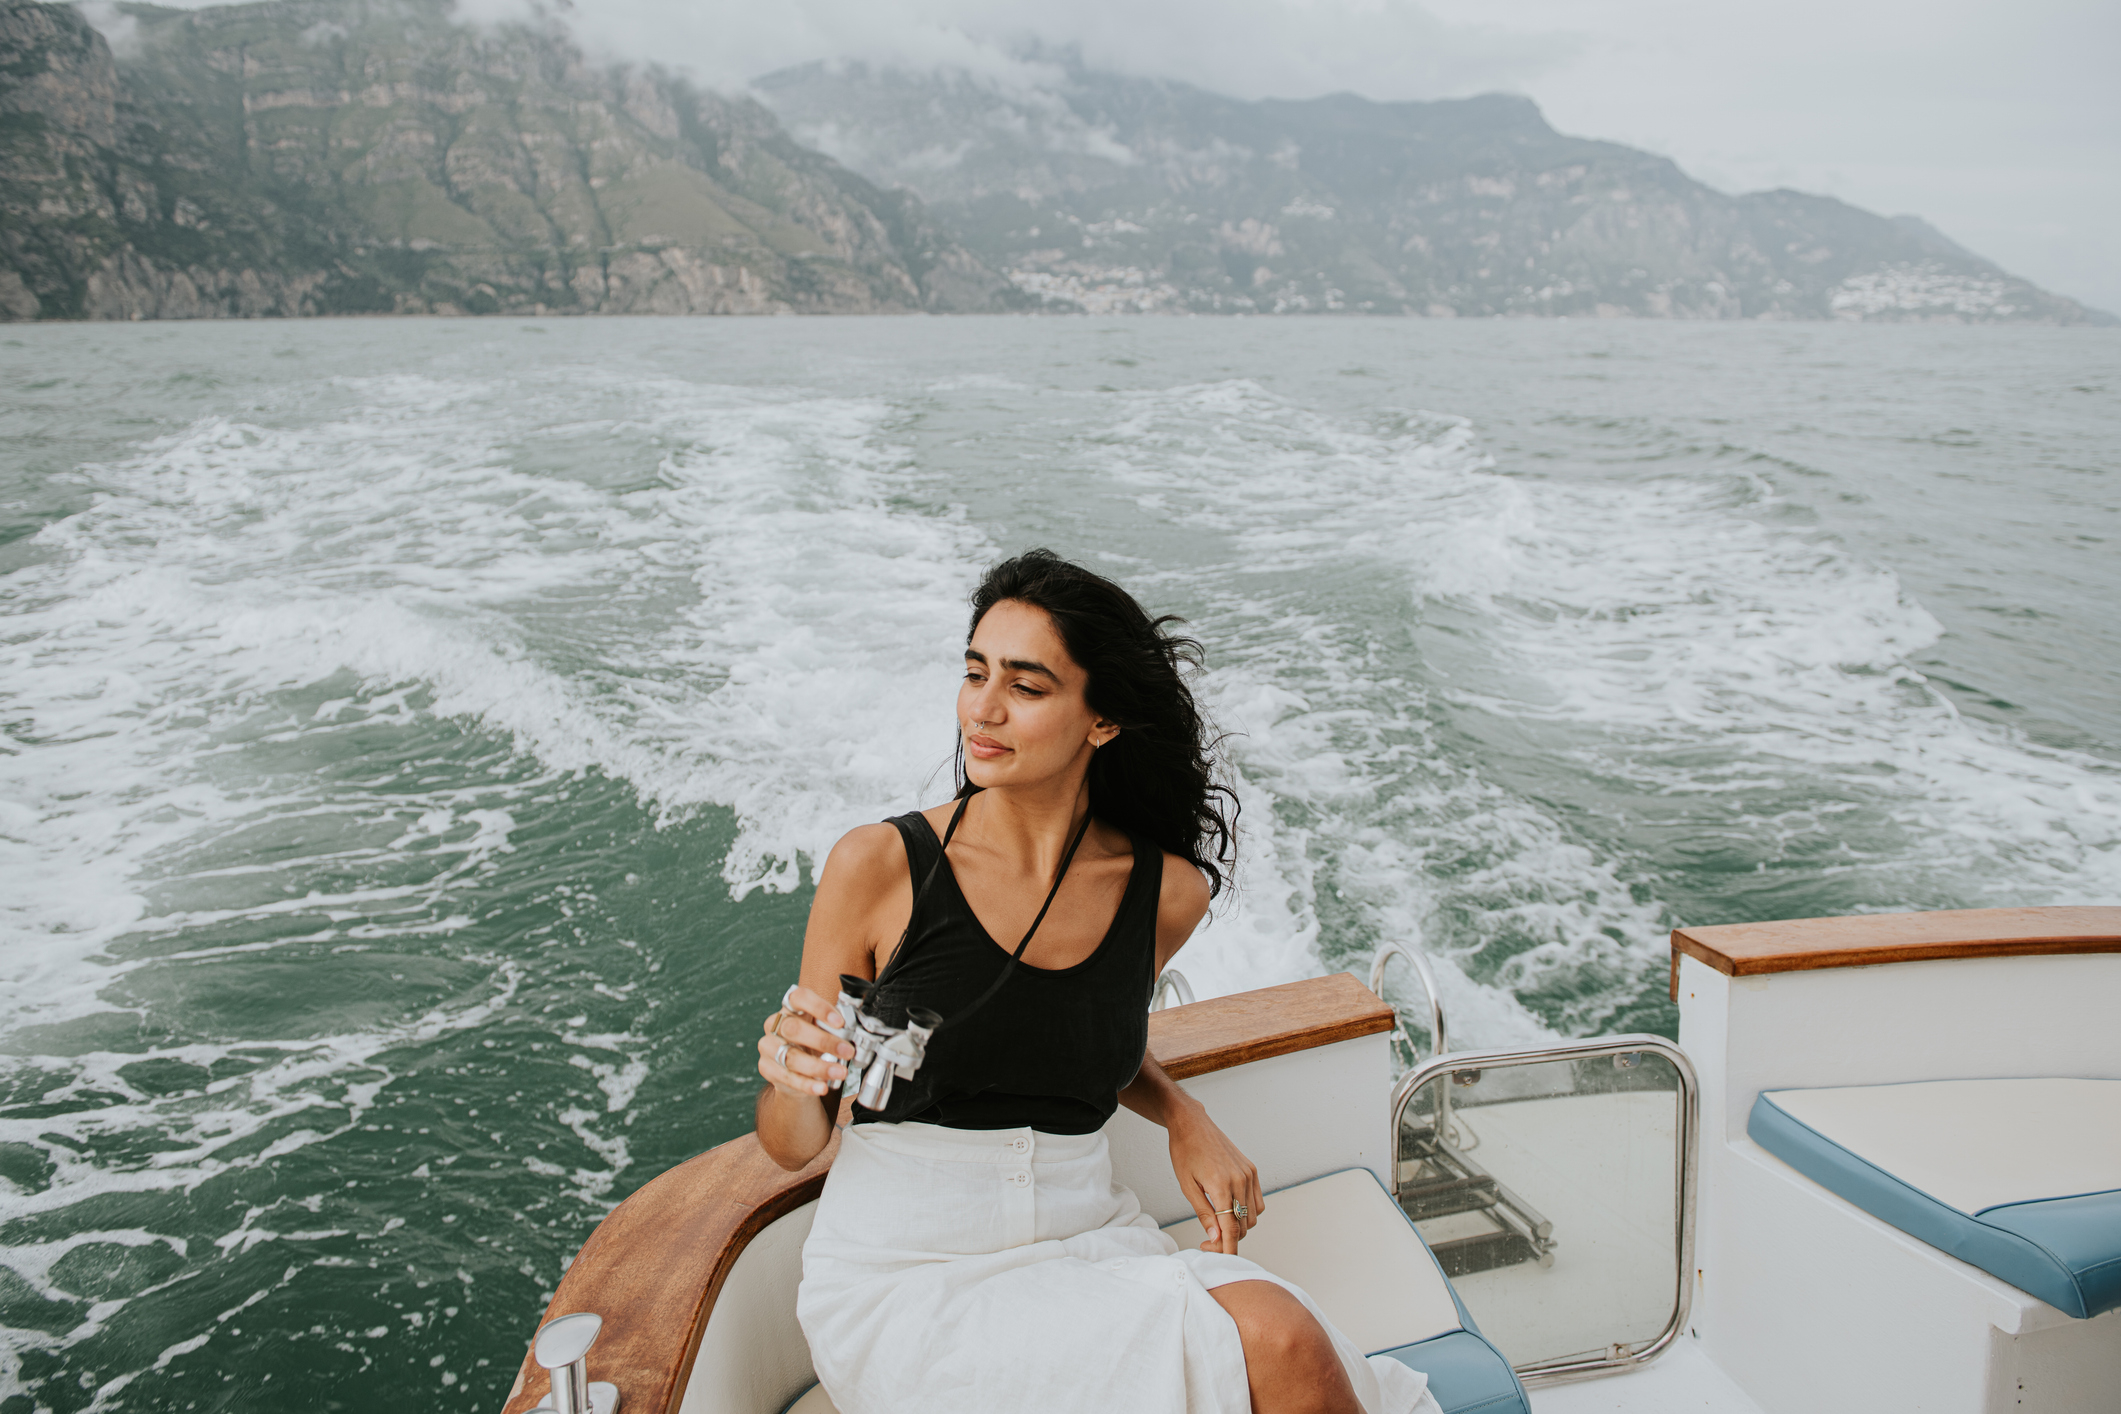 Woman relaxing on a boat with a drink, hair blowing in the wind, facing the sea